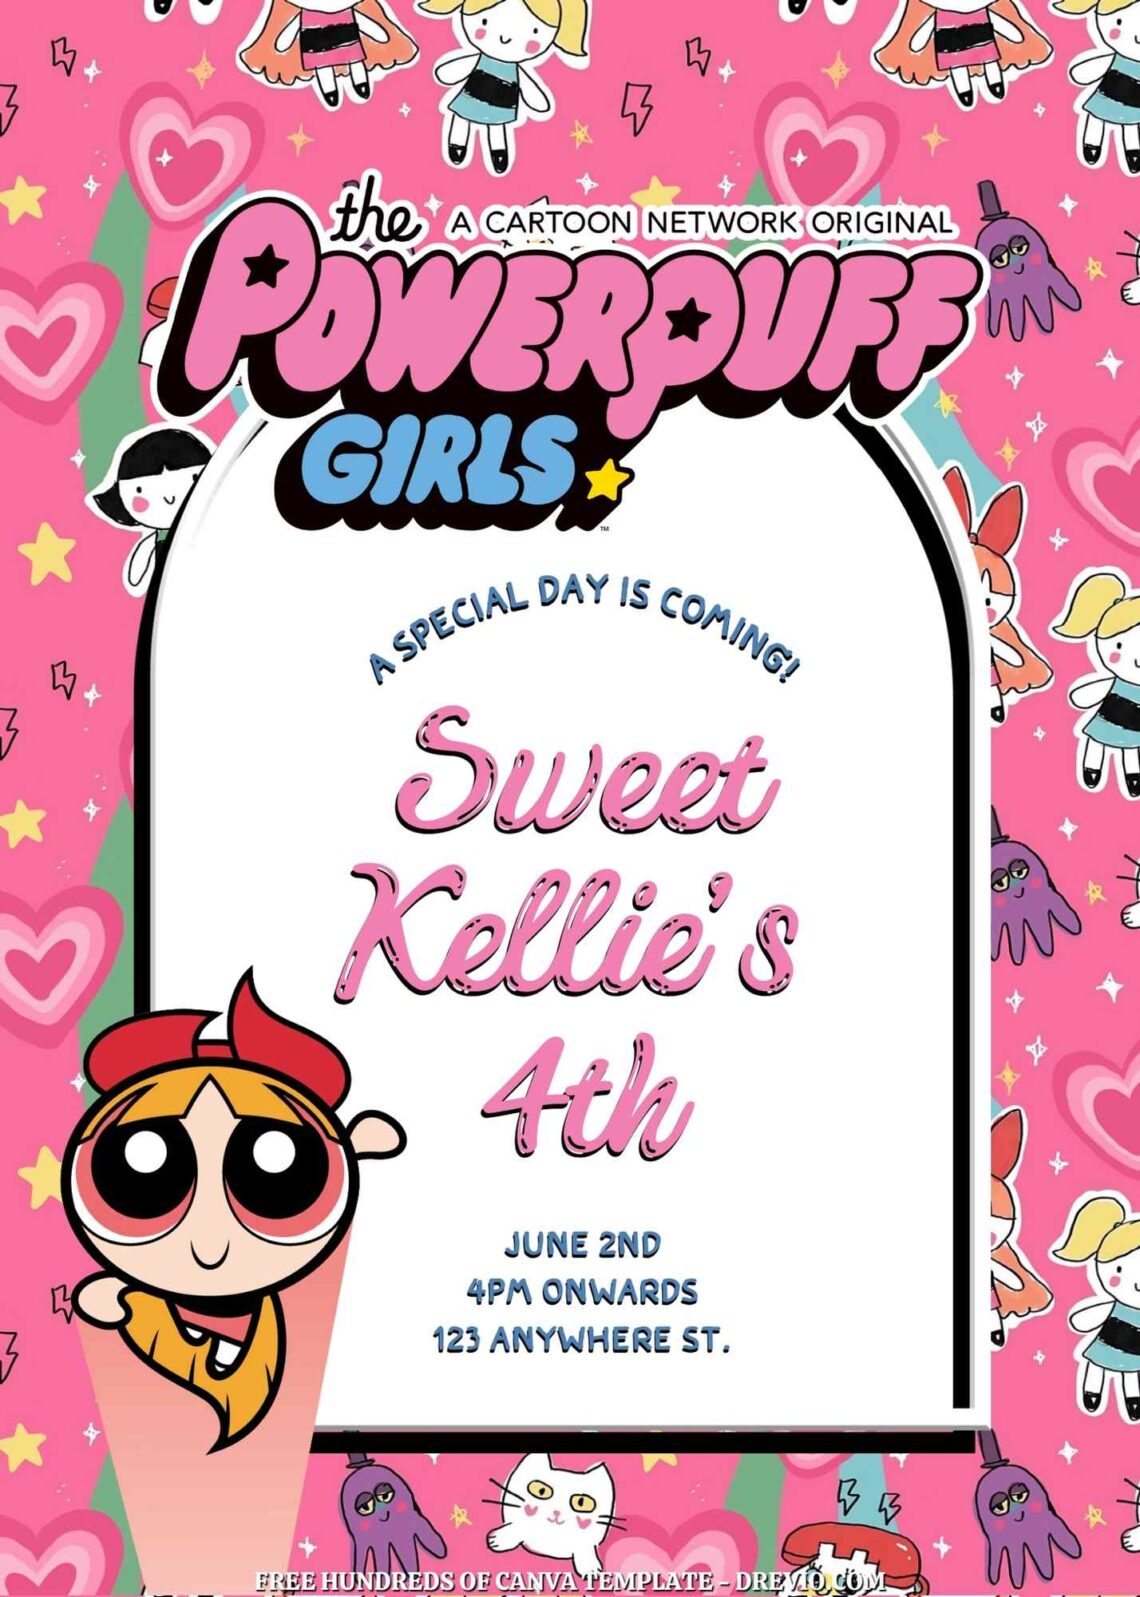 Free Powerpuff Girls Birthday Invitations with Group in the Pink Background